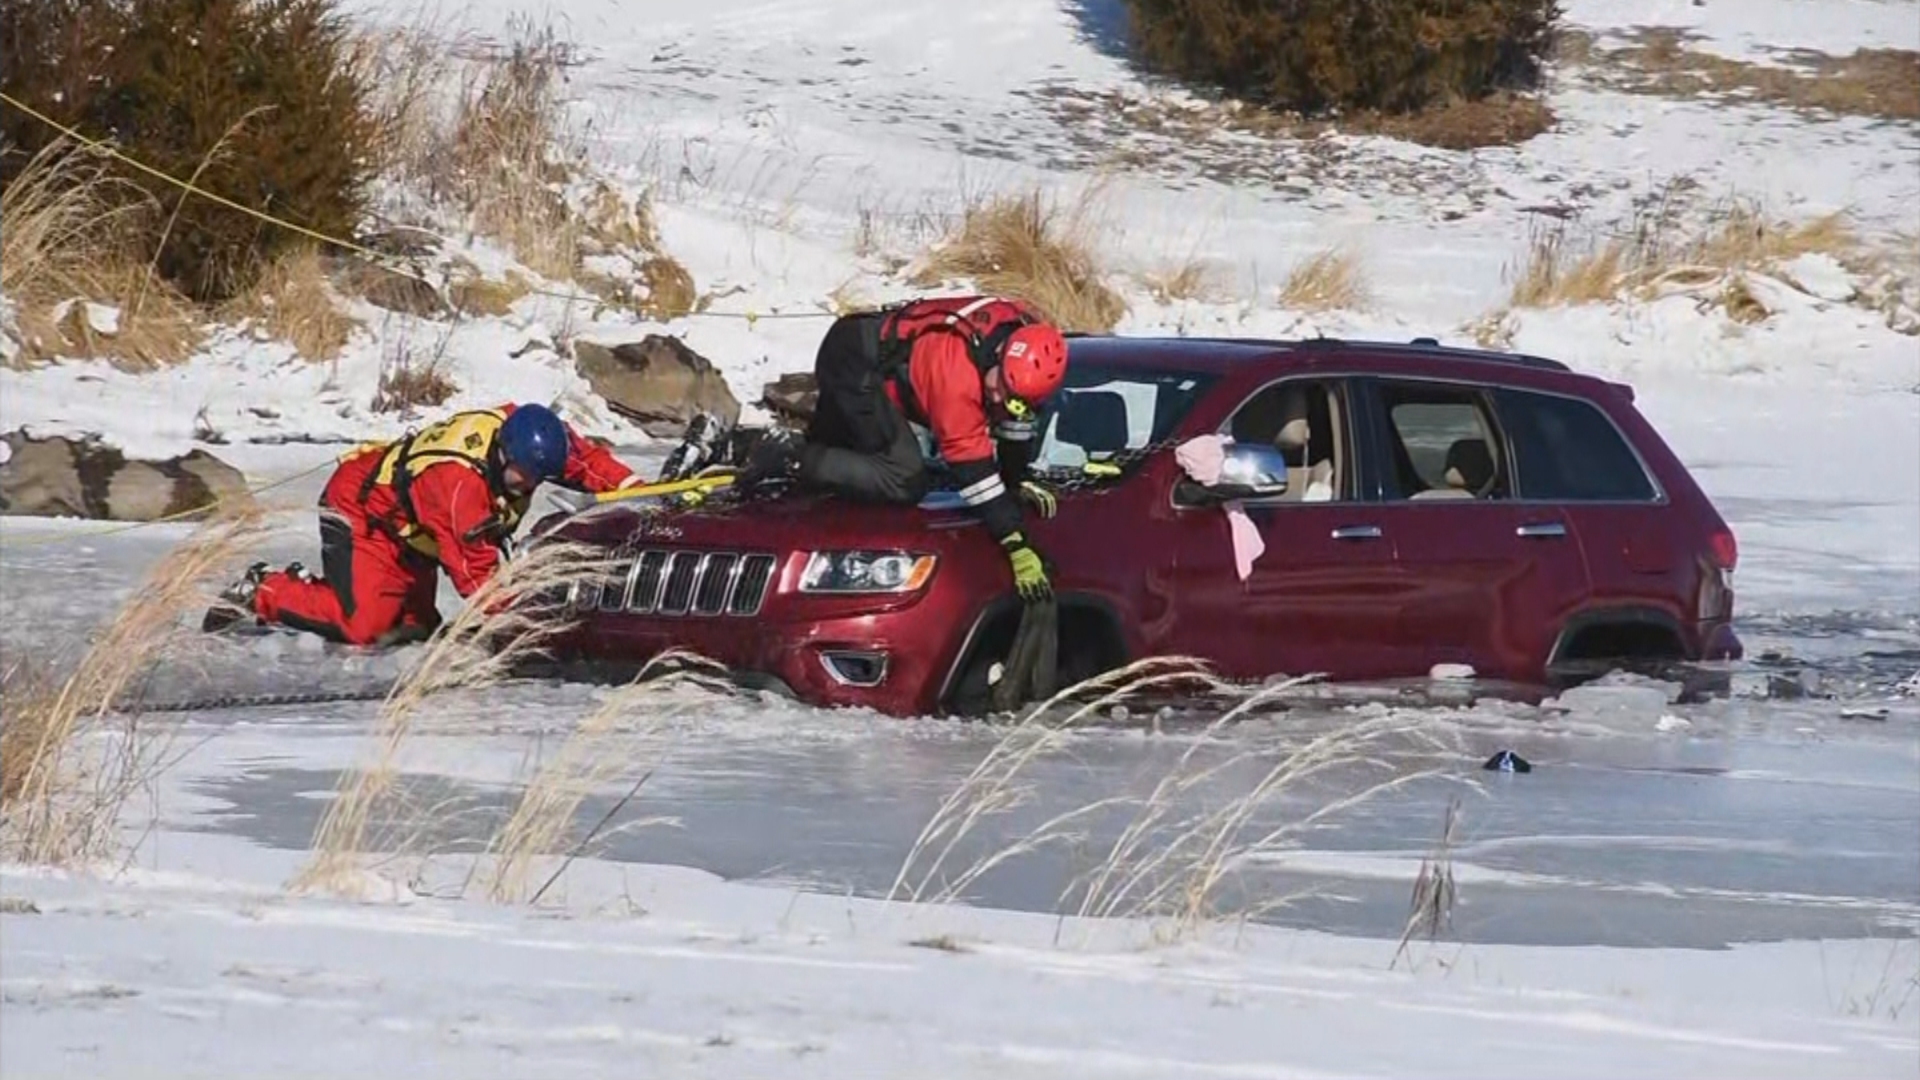 Man Survives After Driving Into Icy Pond On Limerick Township Golf Course In Montgomery County